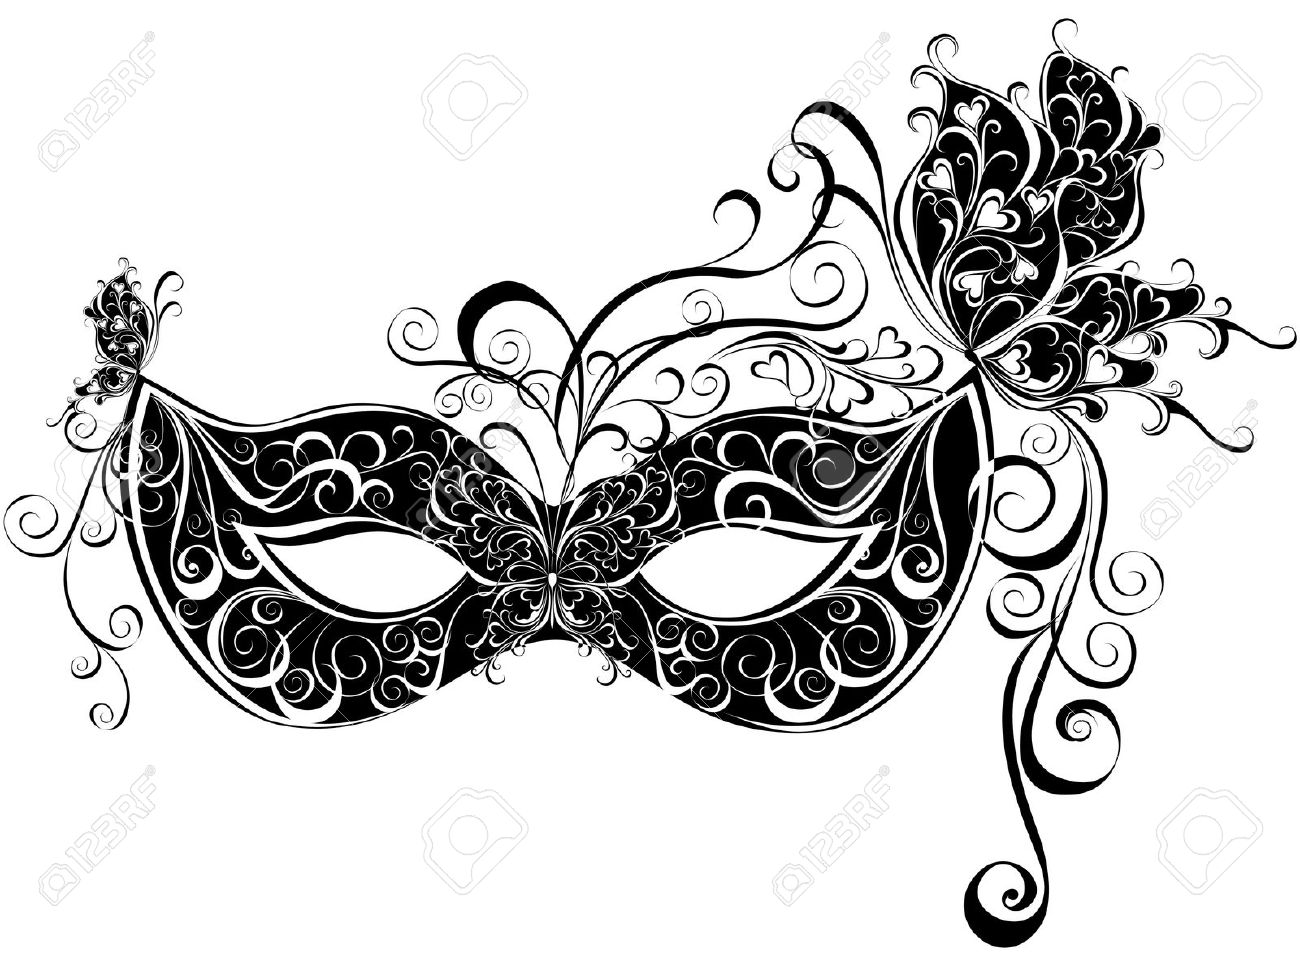 Masquerade clipart #12, Download drawings